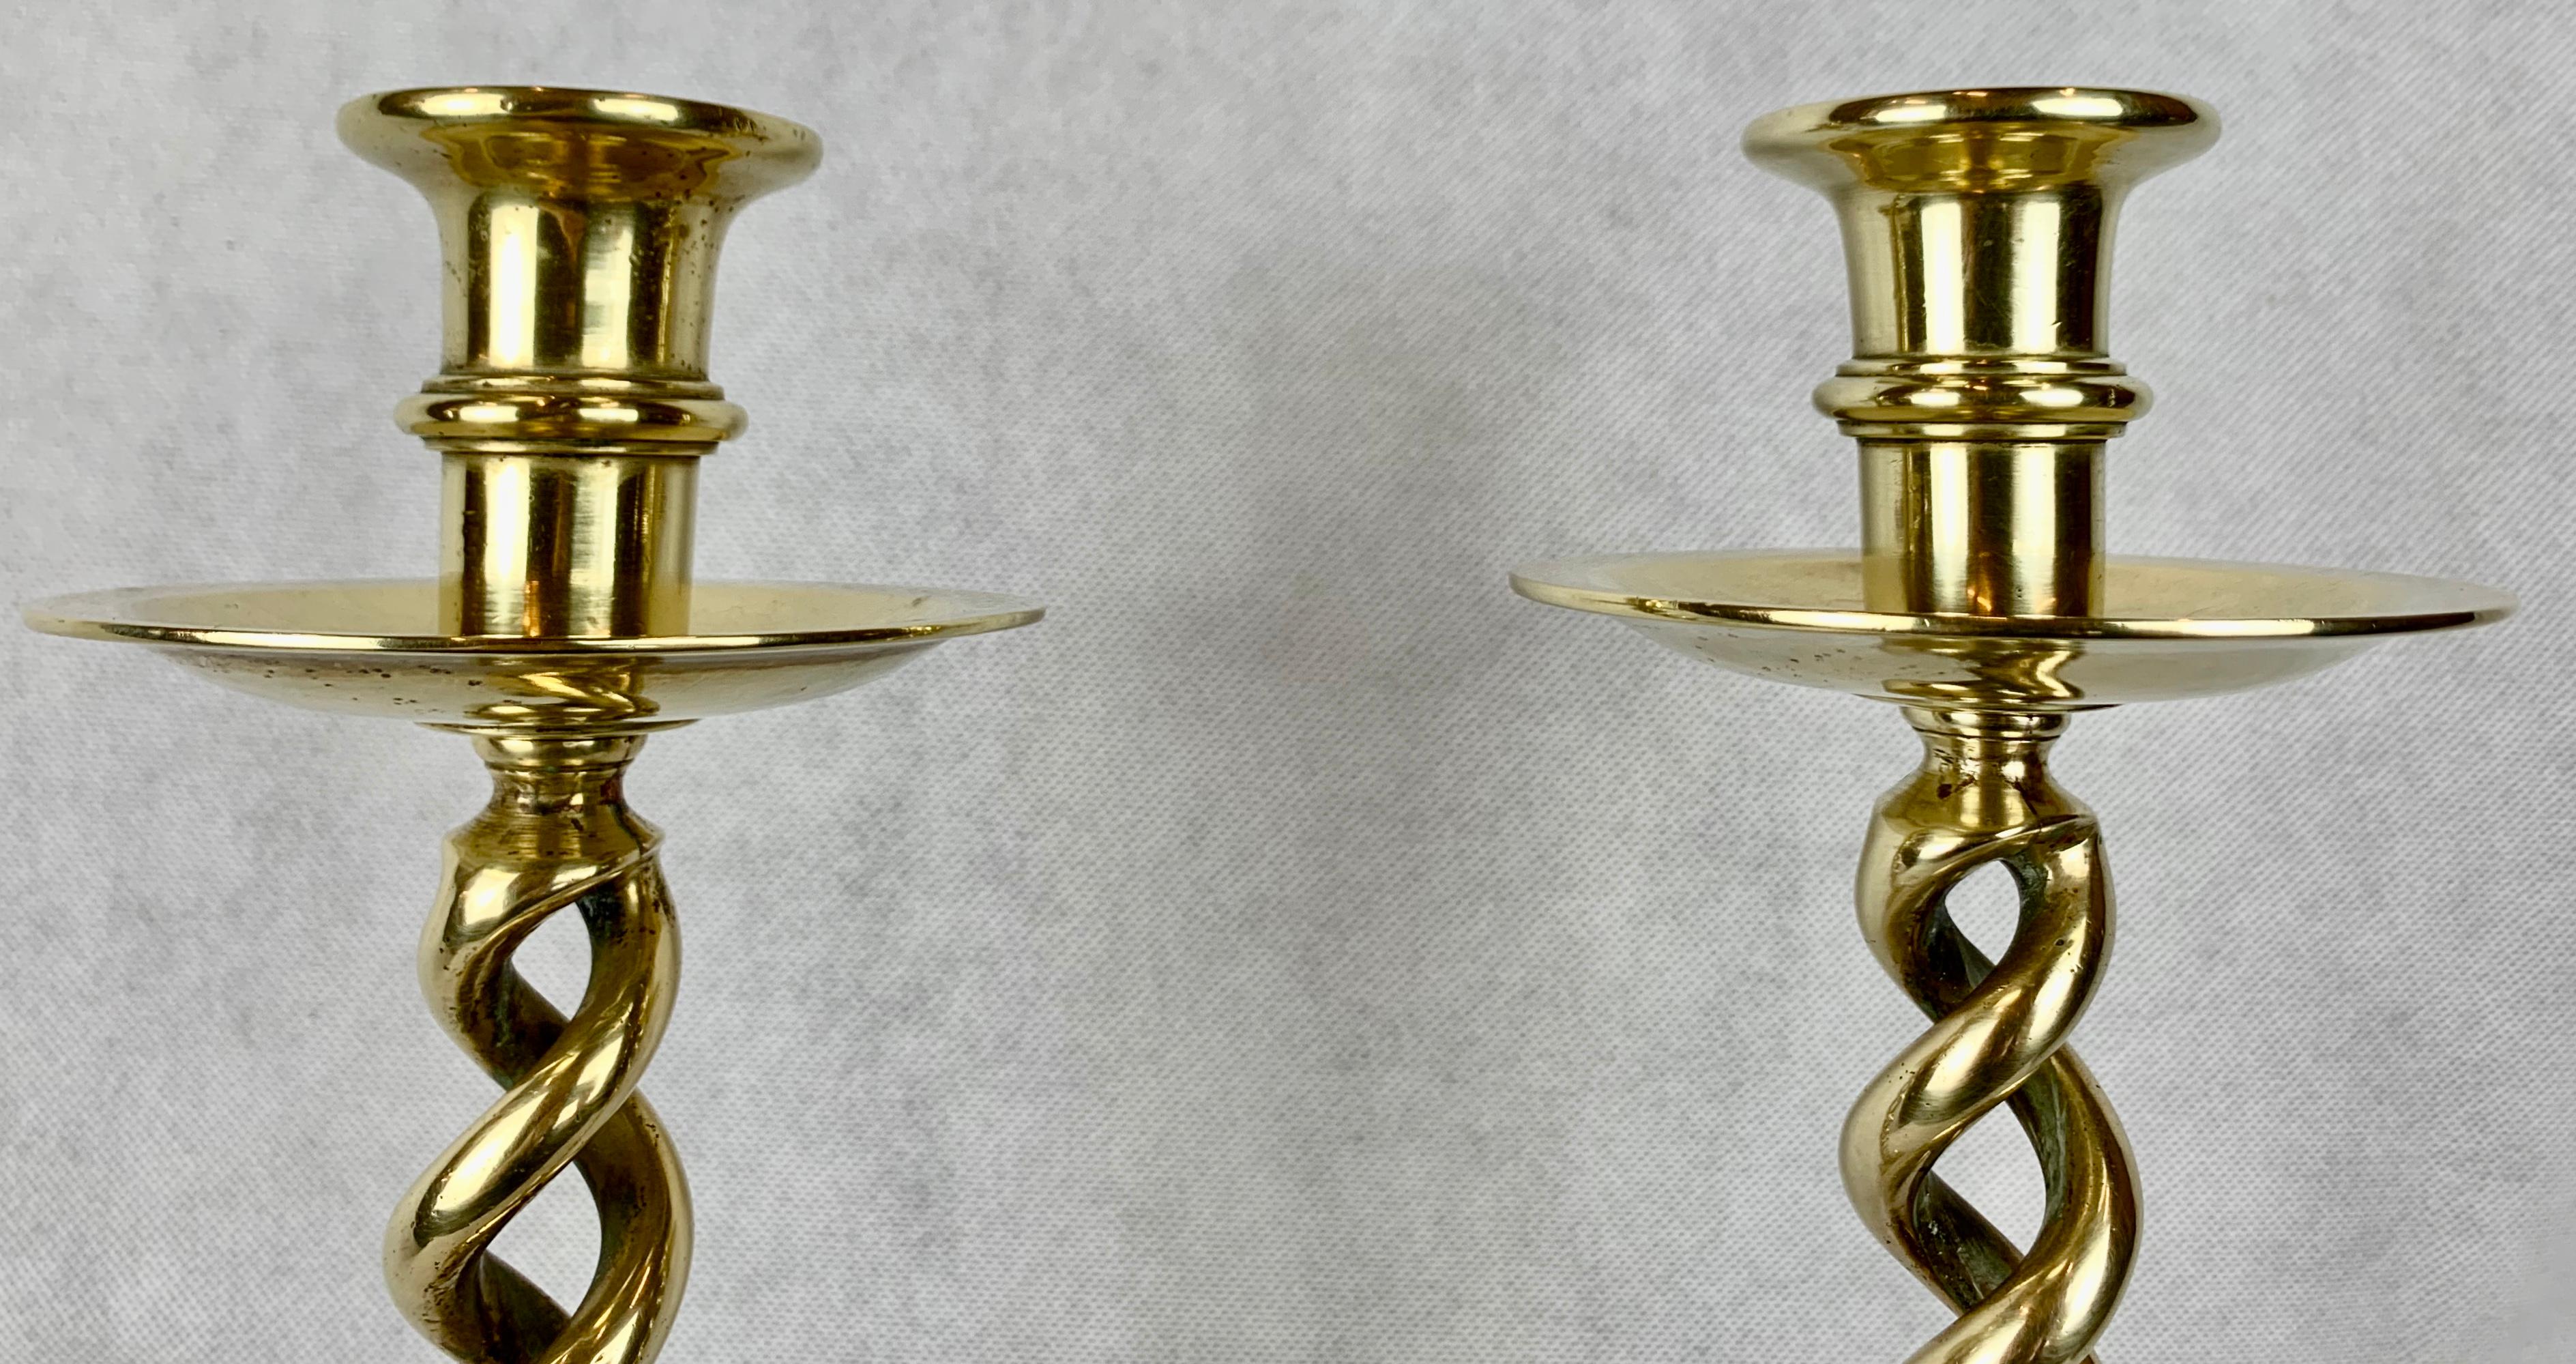 English solid brass barley twist candlesticks are very desirable when they reach 21